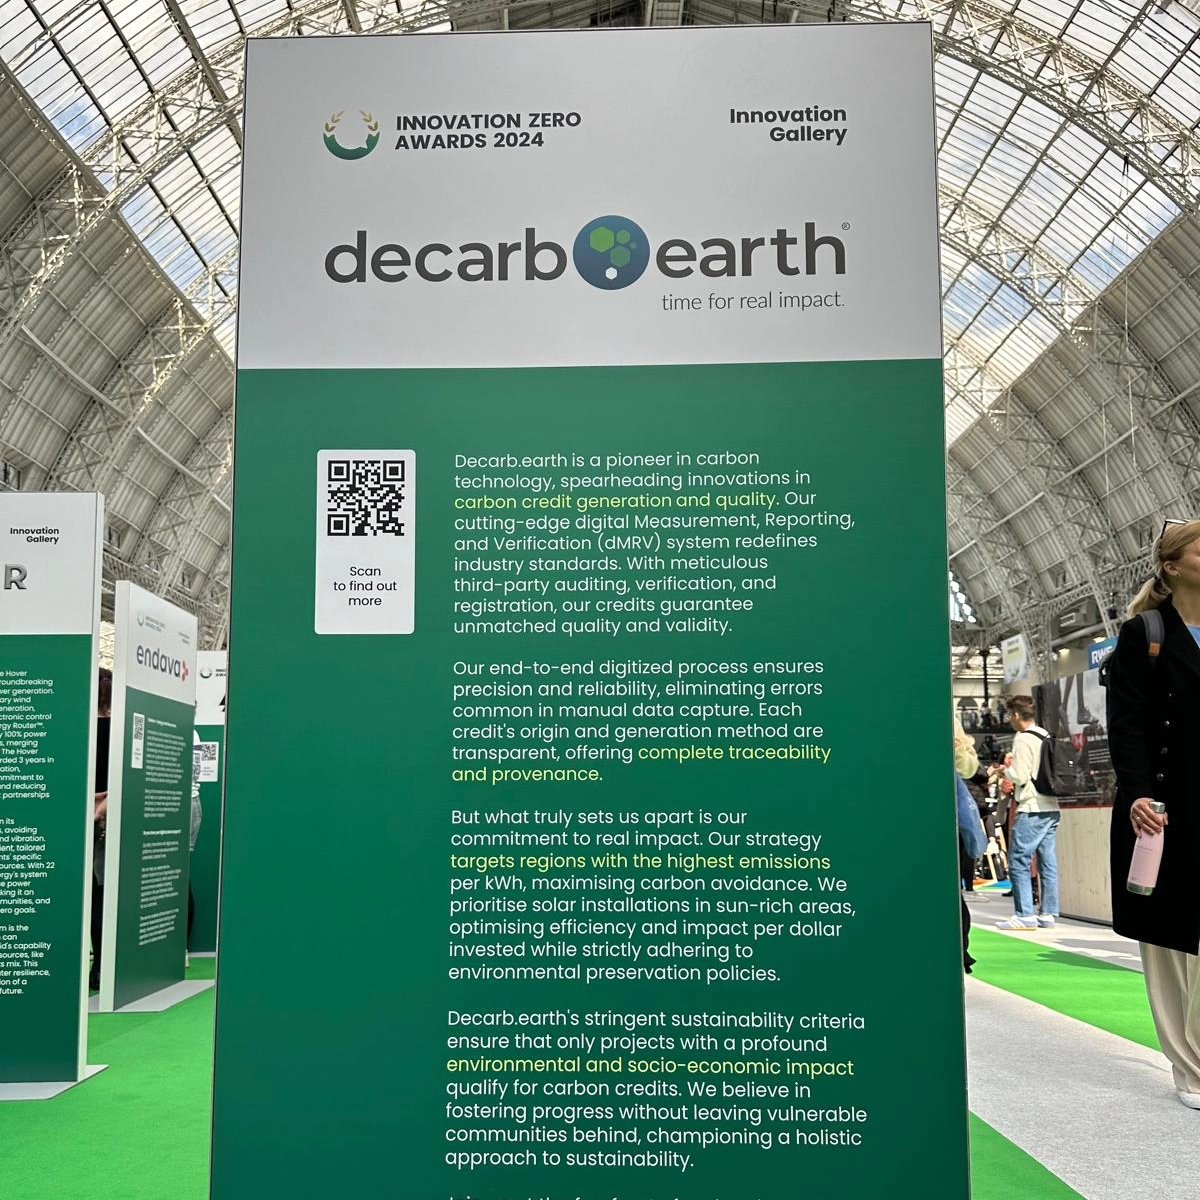 🌿 Highlighting our innovative carbon credit solutions at the UK's largest sustainability conference, Innovation Zero in London! 🌟 

Join us as we lead the way towards a low carbon economy and society. Let's drive change together! 

💚 #InnovationZero #CarbonCredit #DecarbEarth